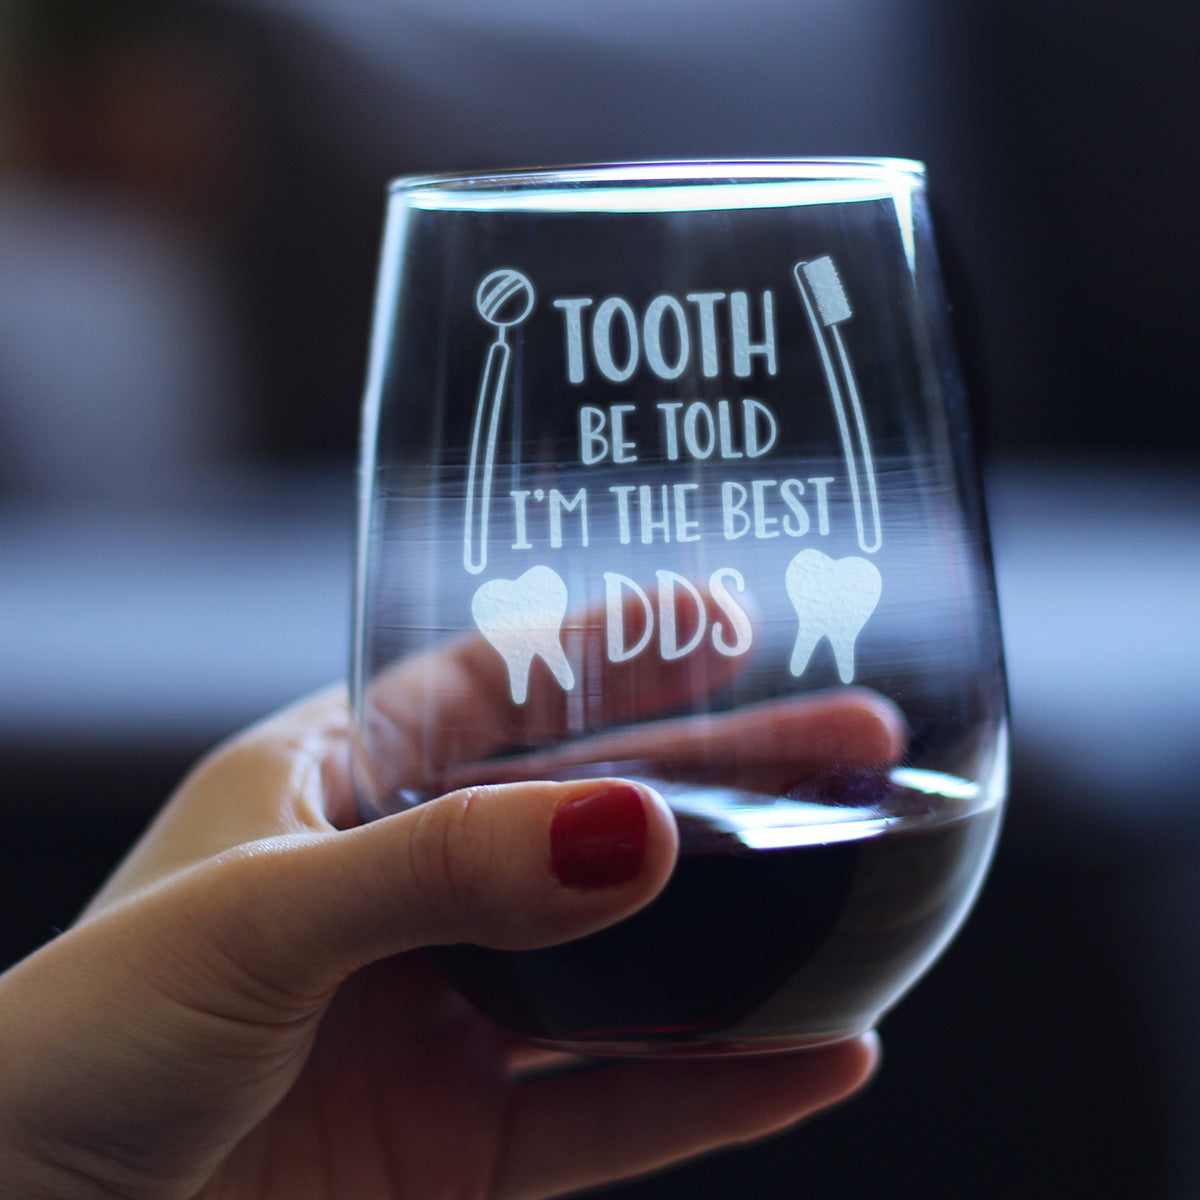 Tooth Be Told - 17 Ounce Stemless Wine Glass